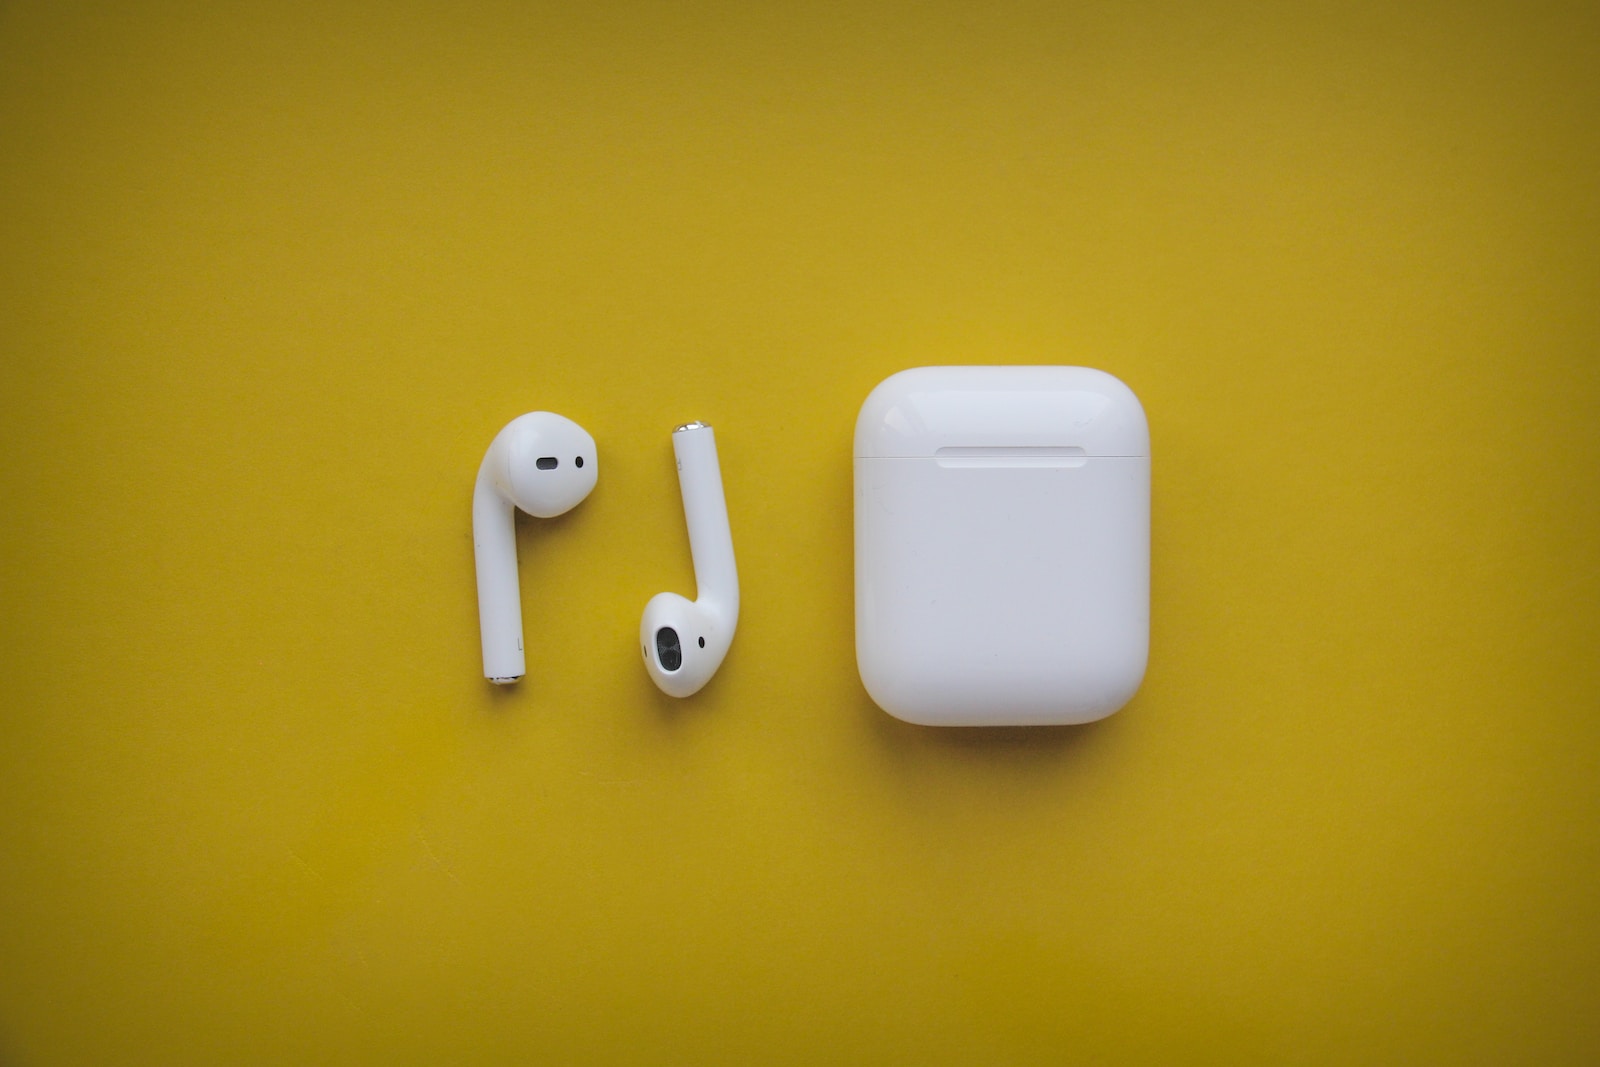 
How To Fix AirPods Pro High Pitched Noise: Step-By-Step Guide